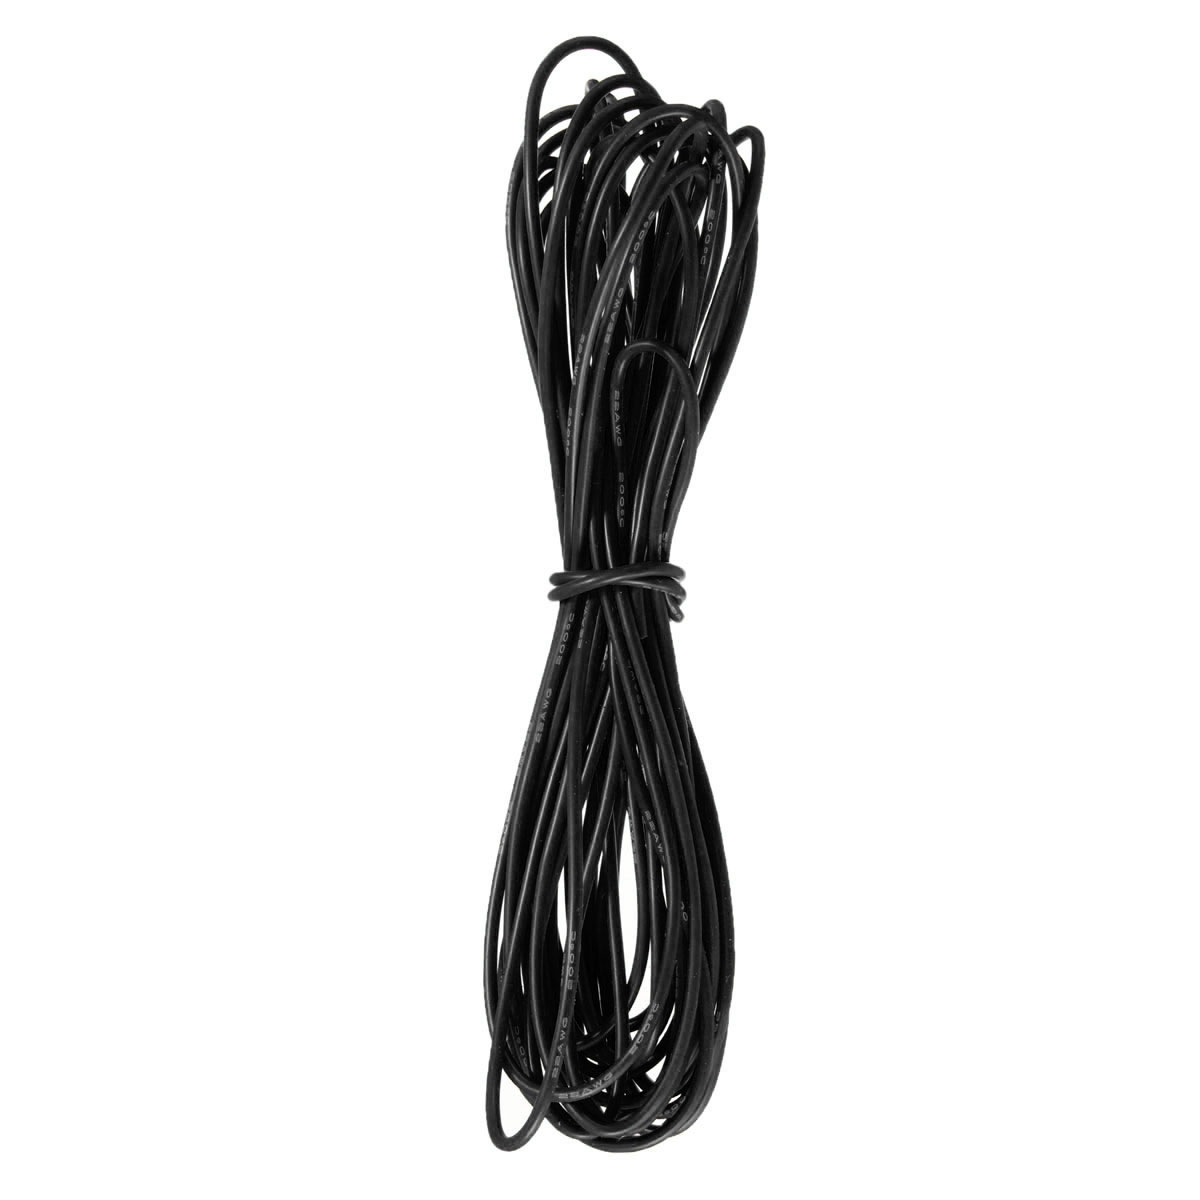 DANIU-5-Meter-Black-Silicone-Wire-Cable-10121416182022AWG-Flexible-Cable-1170293-9